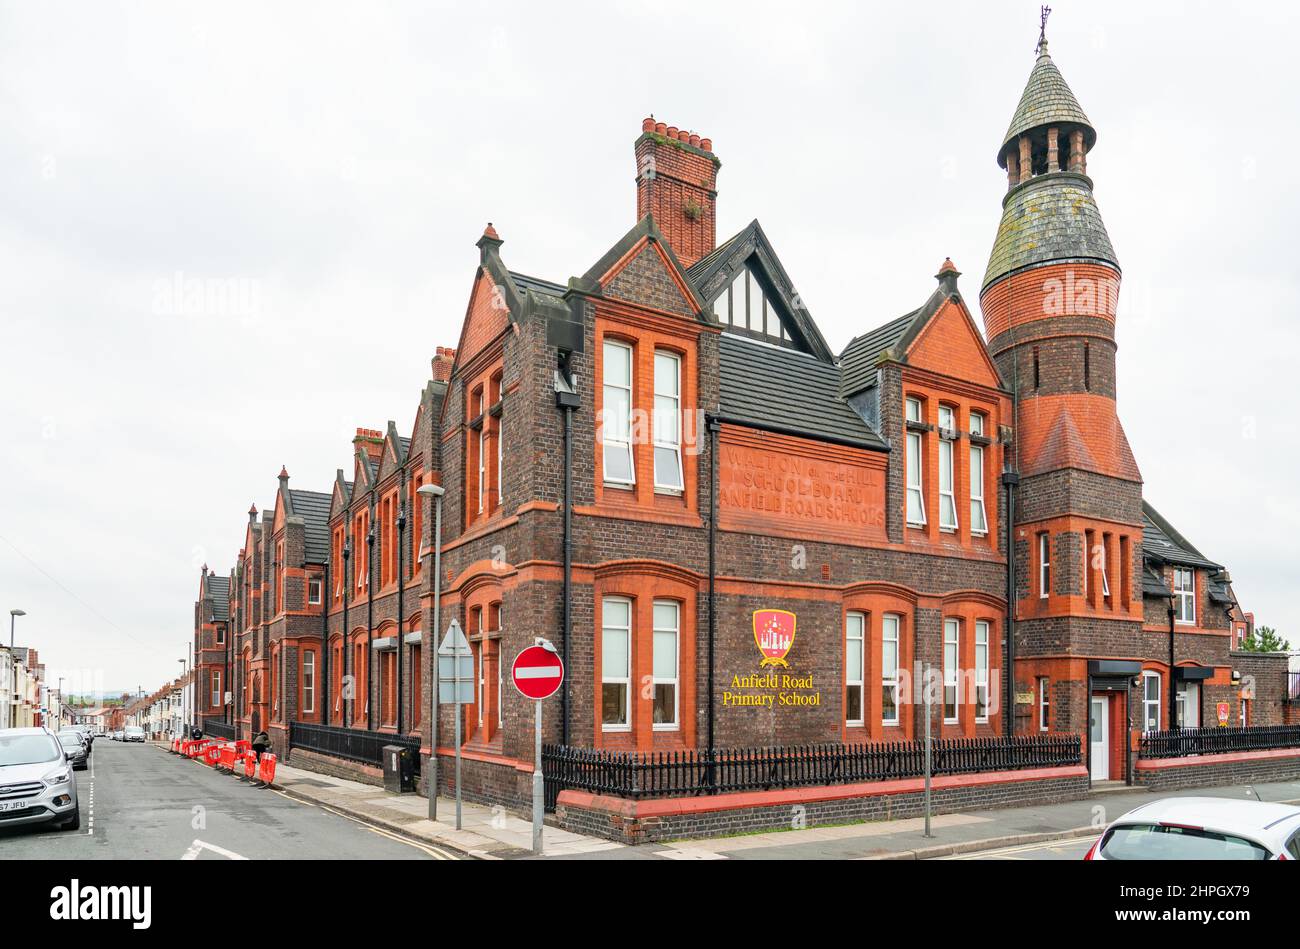 Anfield Road Primary School, Liverpool 4. Image taken in September 2021. Stock Photo